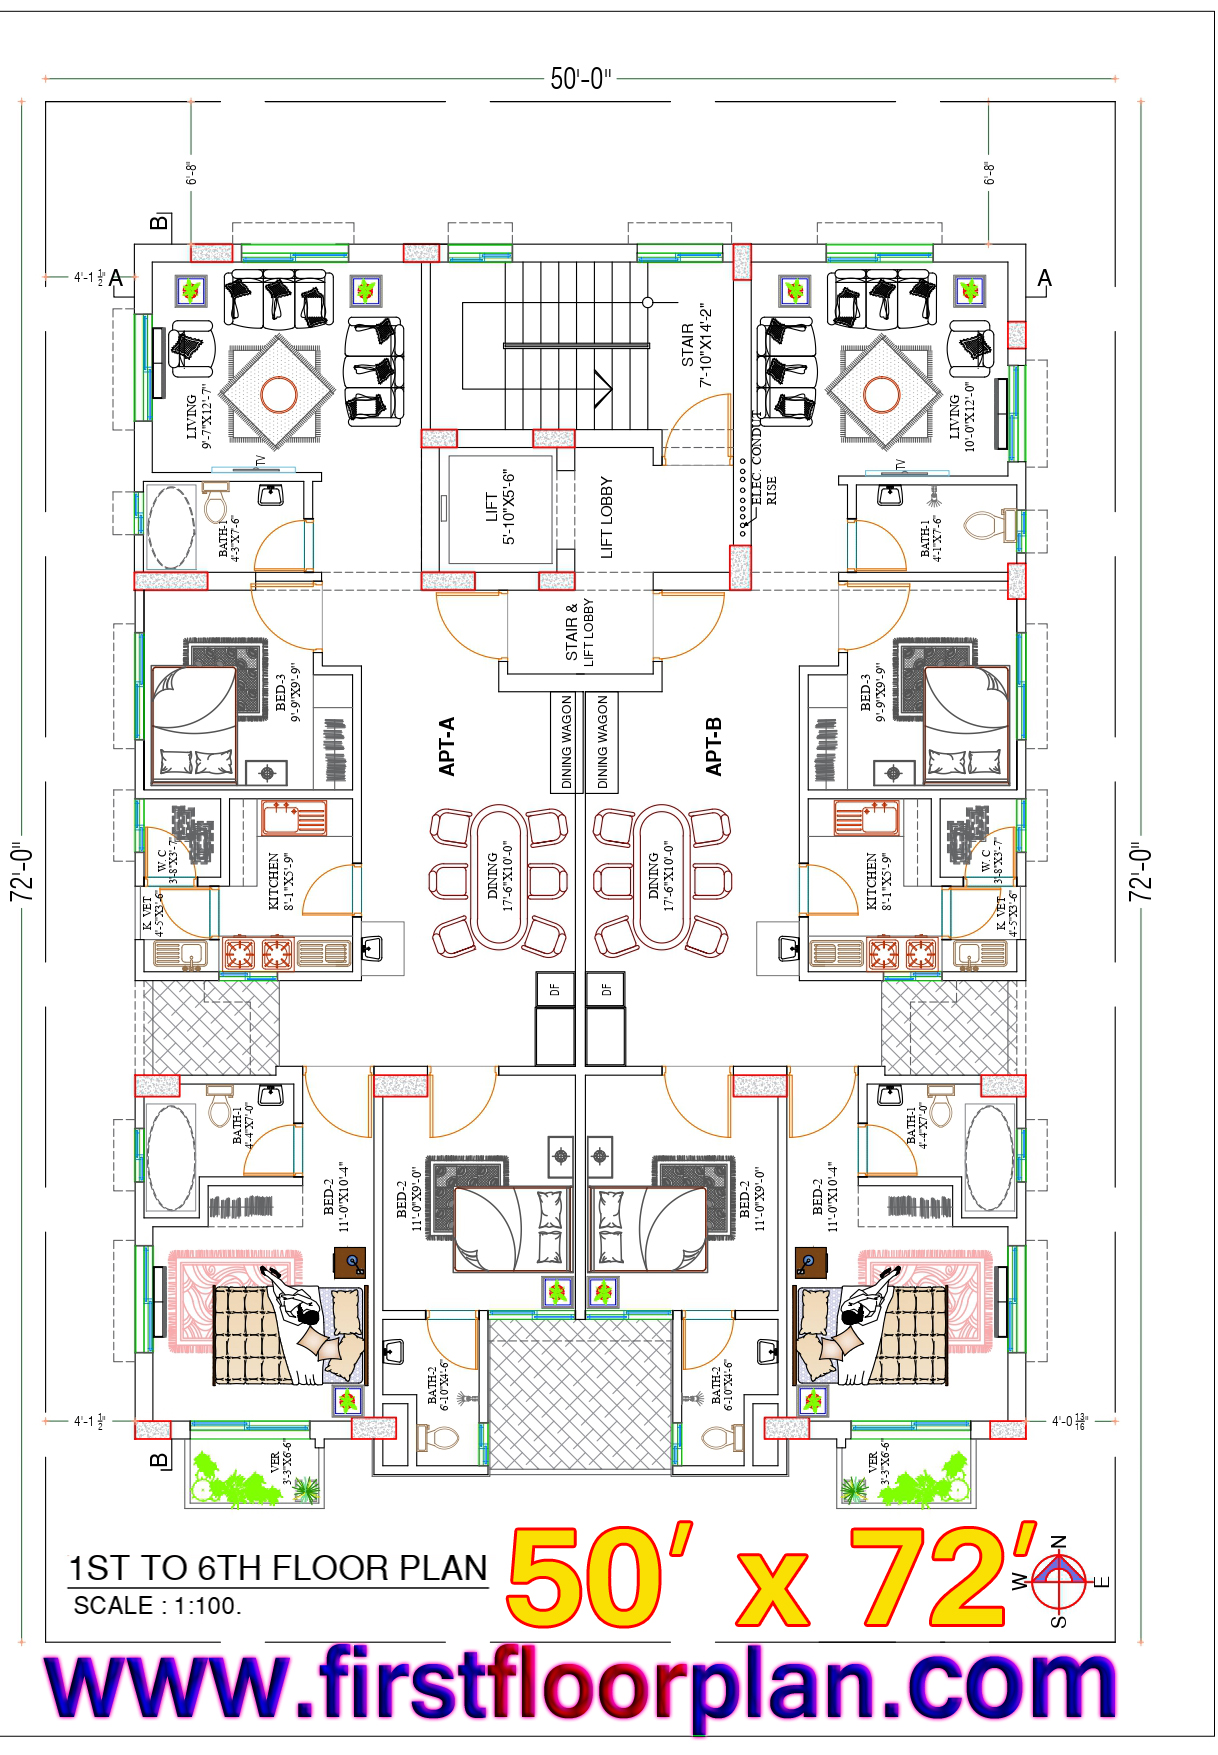 3600 Square Feet 50x72 House plan - Typical Floor Plan